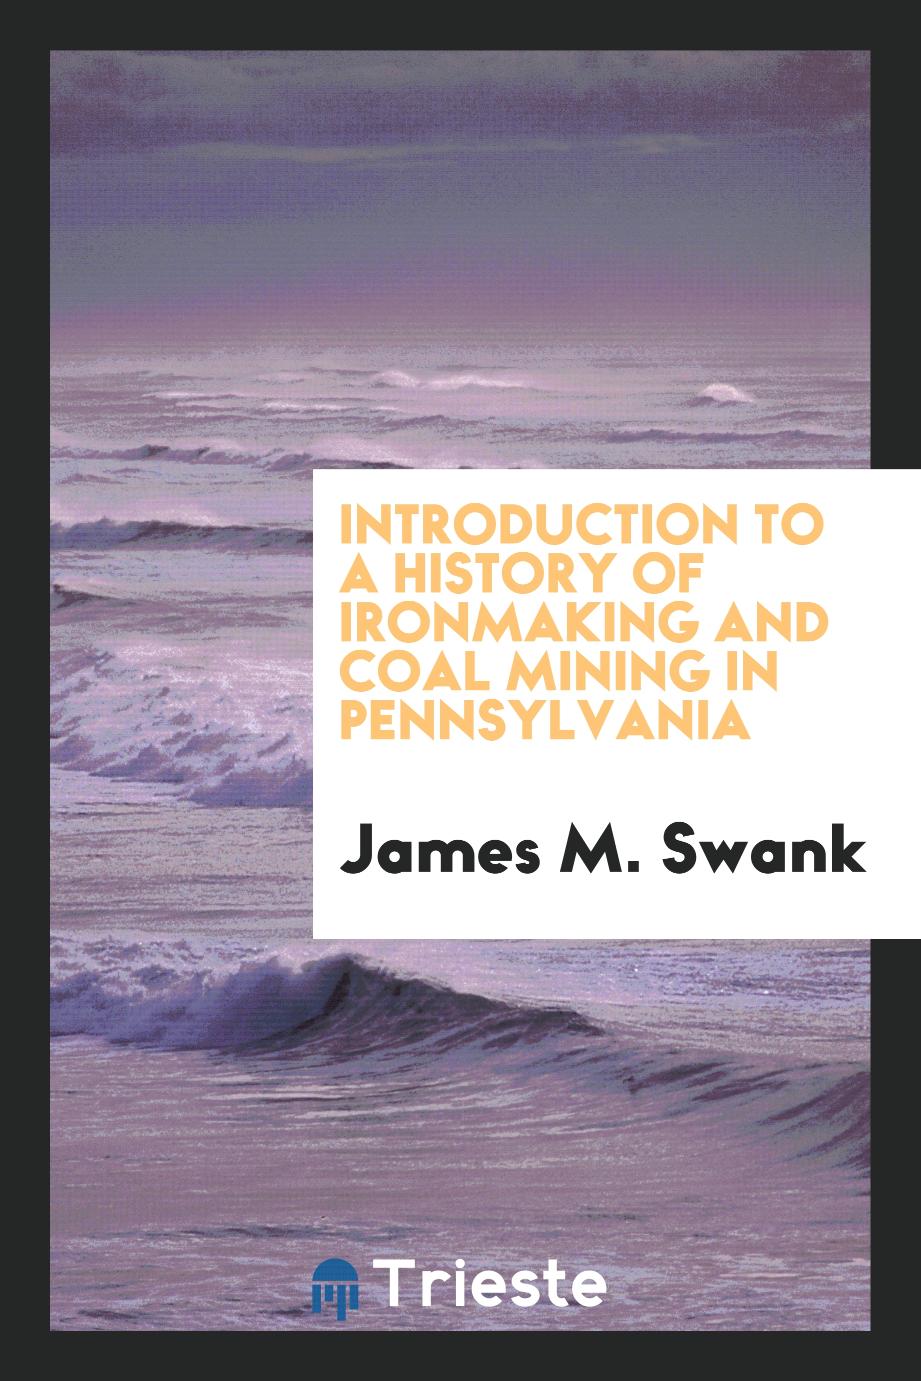 Introduction to a History of Ironmaking and Coal Mining in Pennsylvania